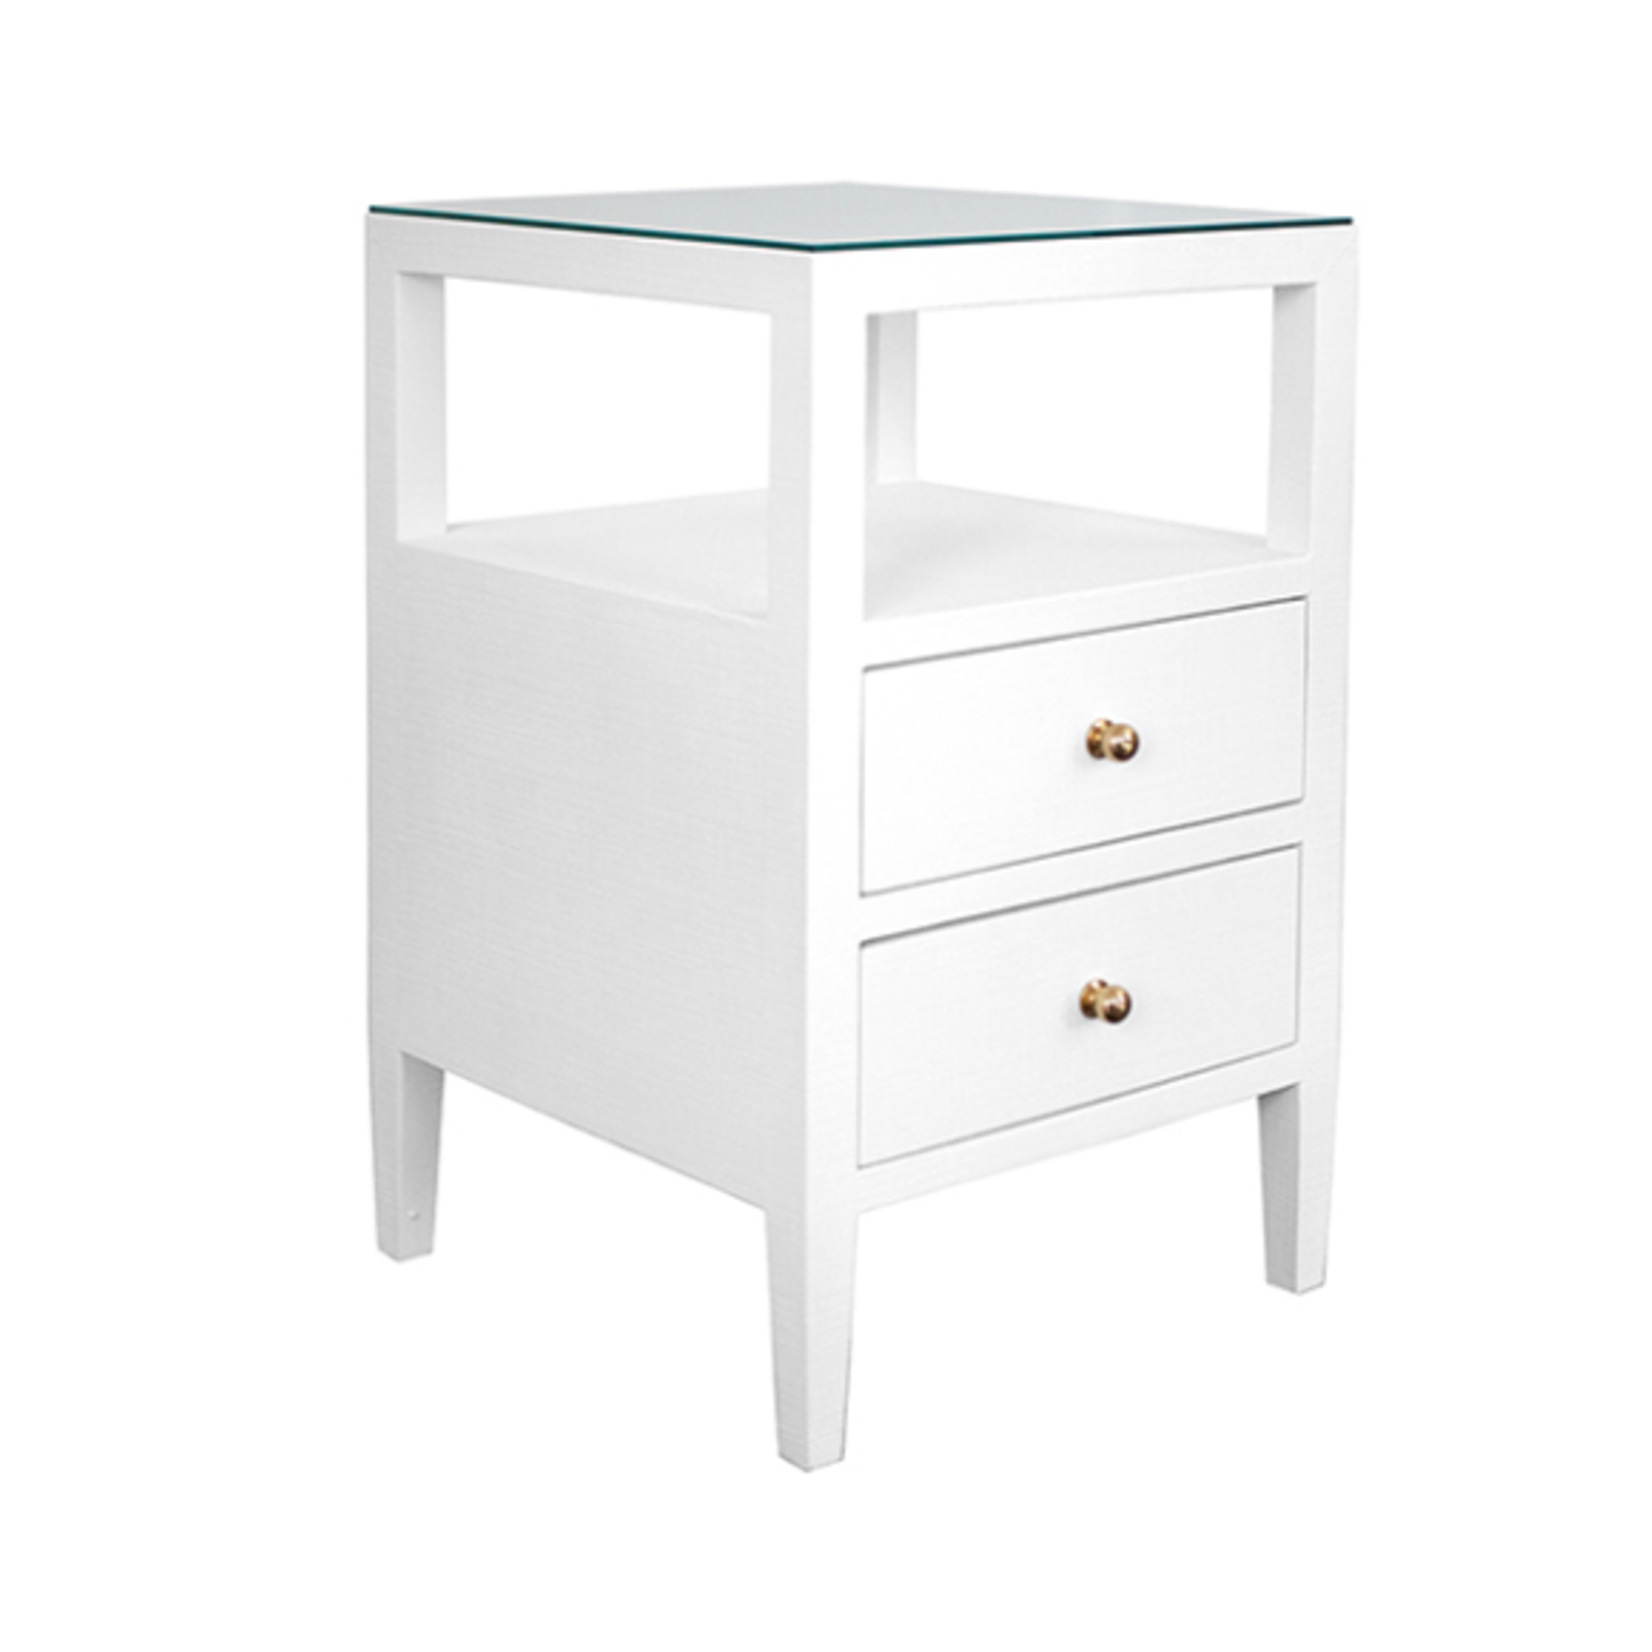 Outside The Box 18x18x30 Worlds Away Roscoe White Linen Wrapped Side Table / Nightstand